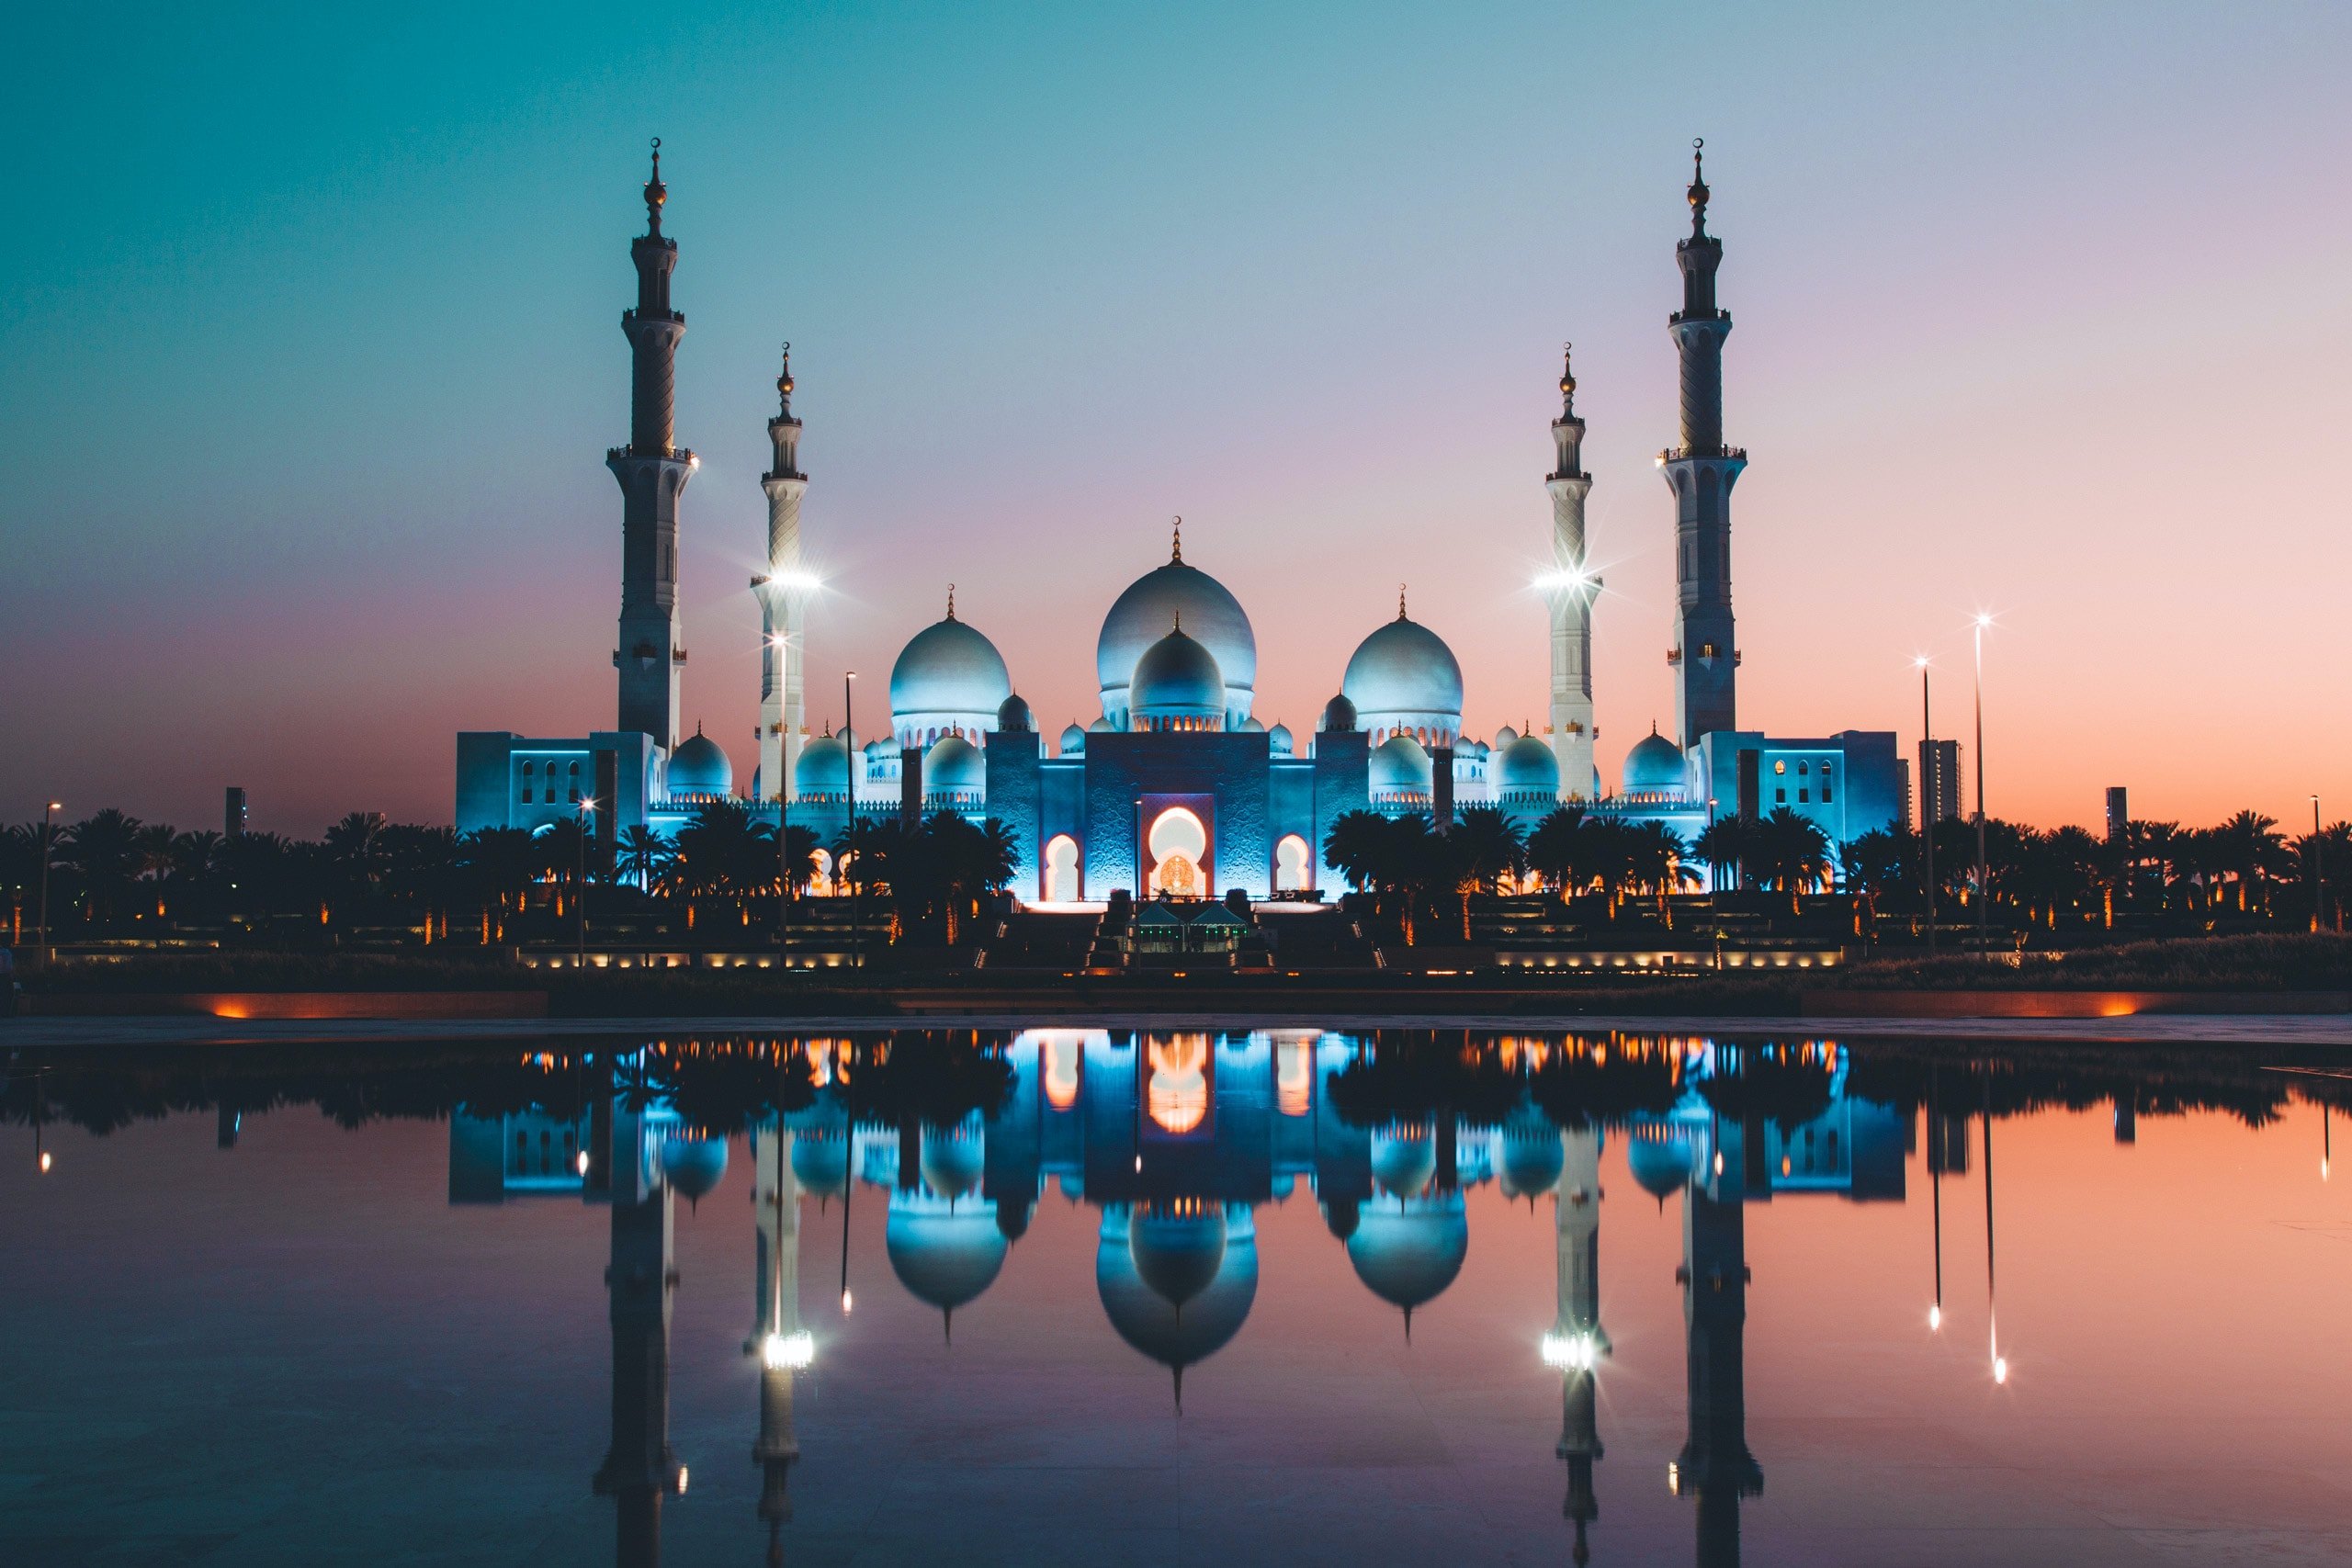 The Sheikh Zayed Grand Mosque in Abu Dhabi is light up at dusk